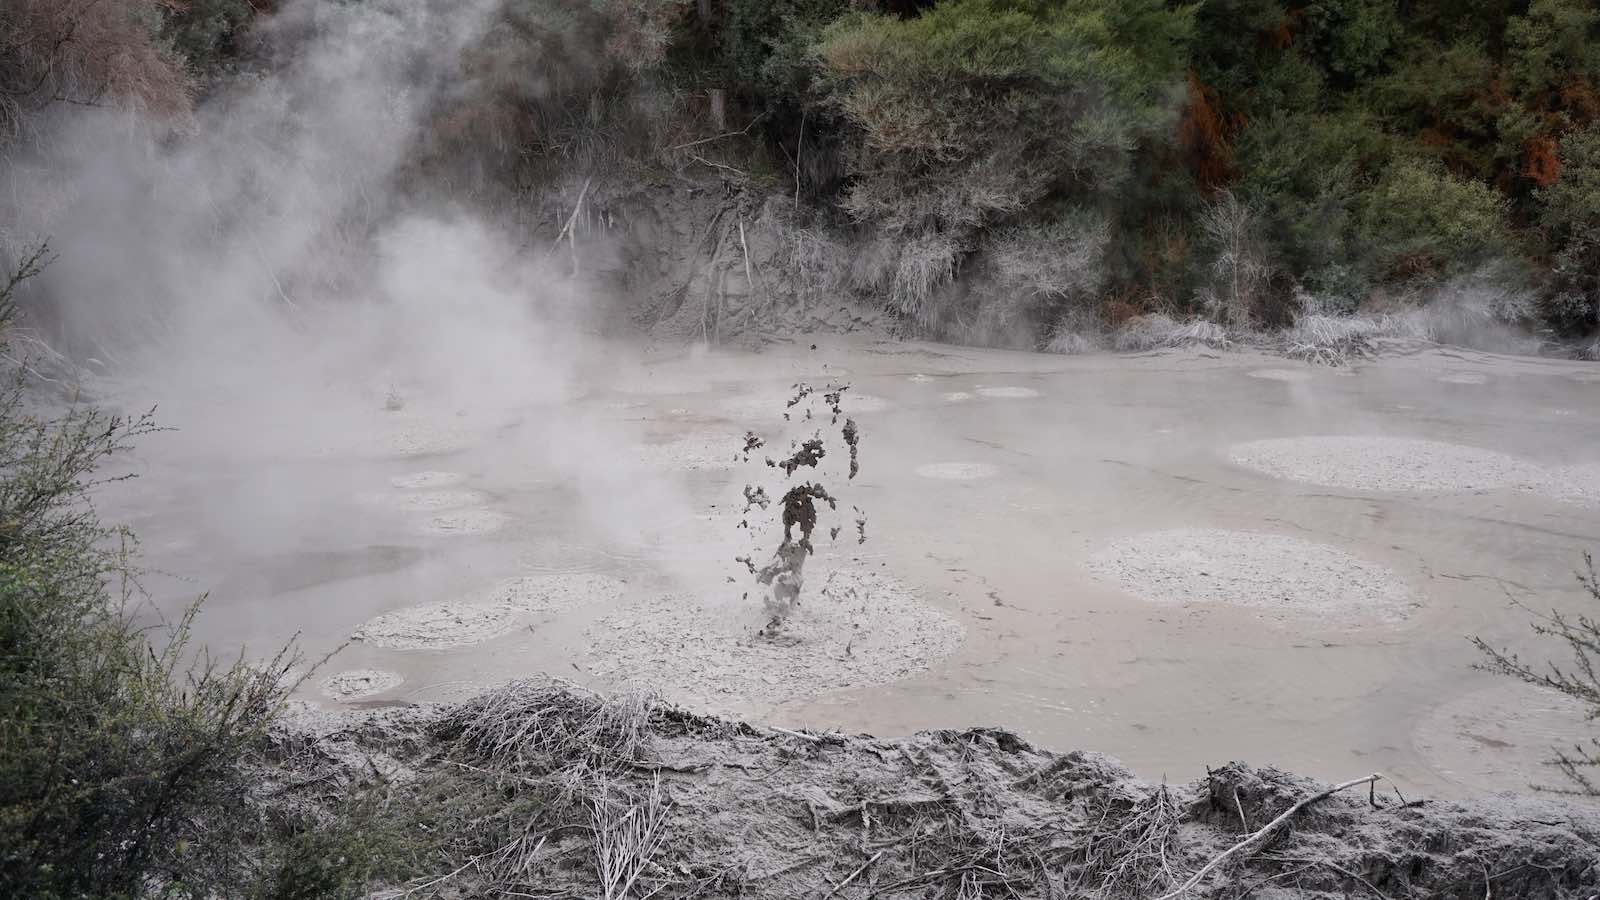 Earth's so hot, making that mud pop